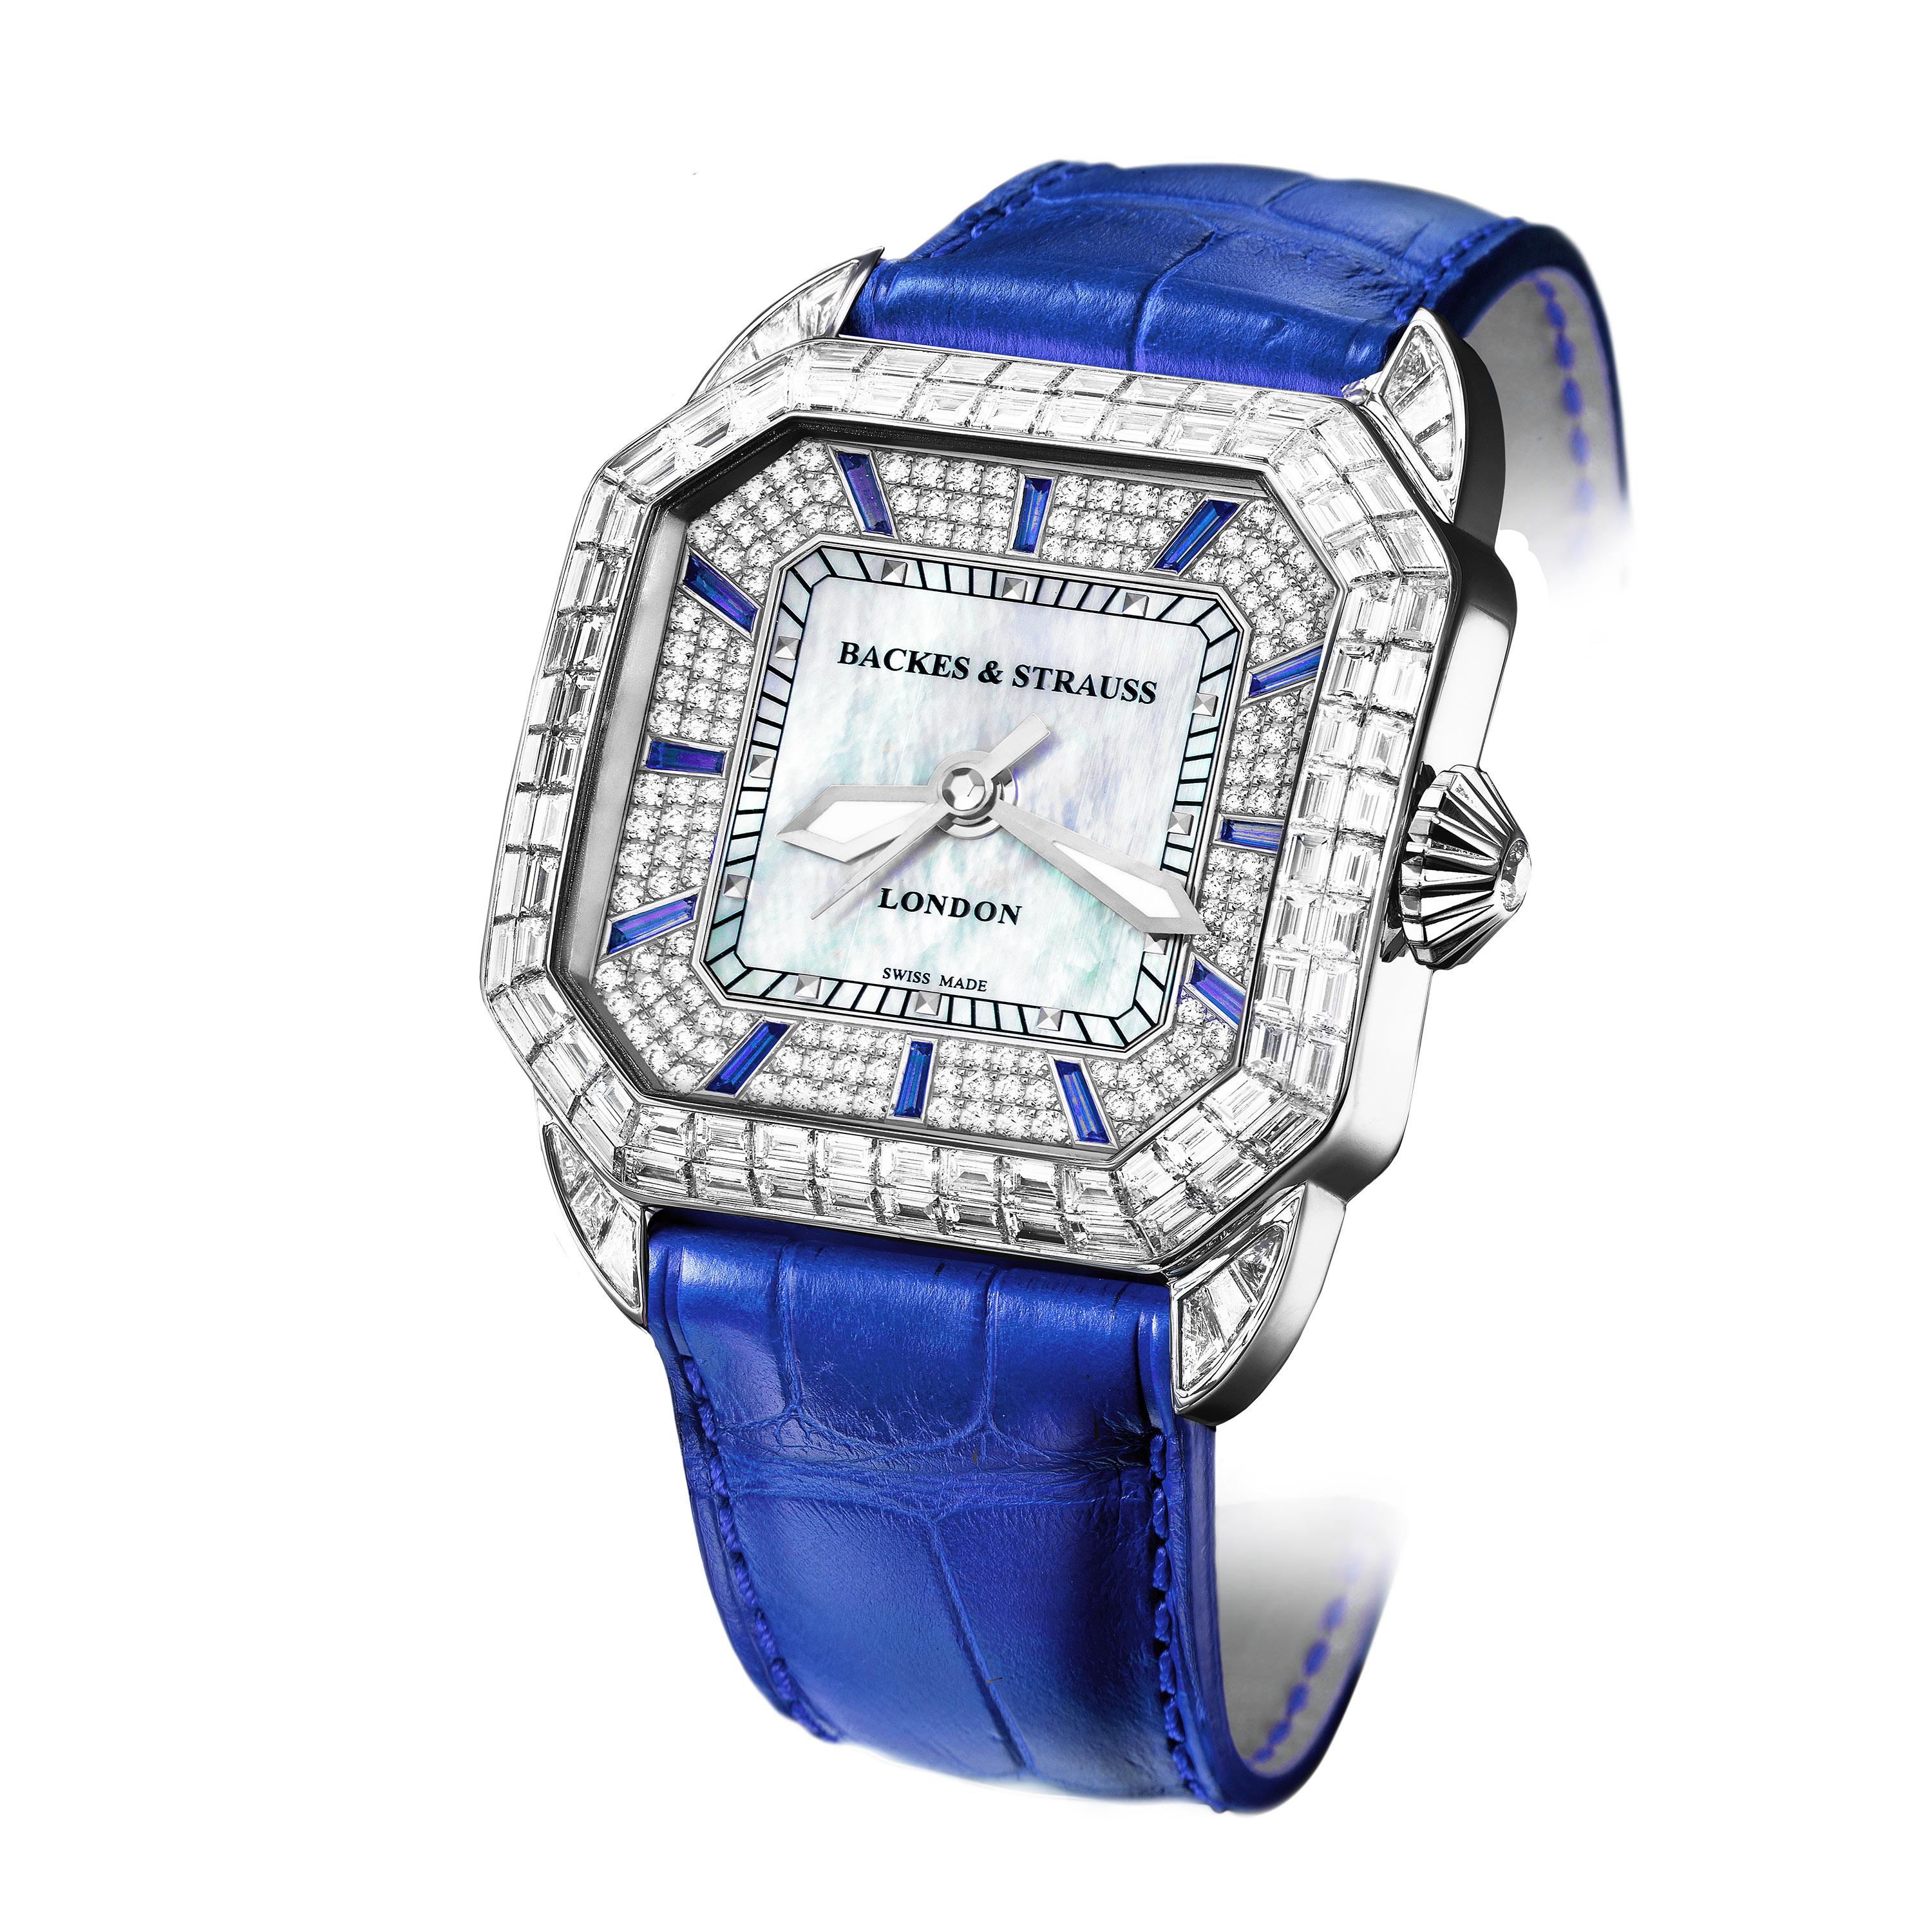 Berkeley Baguette Blue Velvet 40 is a luxury diamond watch for men and women crafted in 18kt white gold, featuring the mother-of-pearl dial with sapphire-set time indicators, automatic movement. The case, dial, buckle and crown are set with Baguette